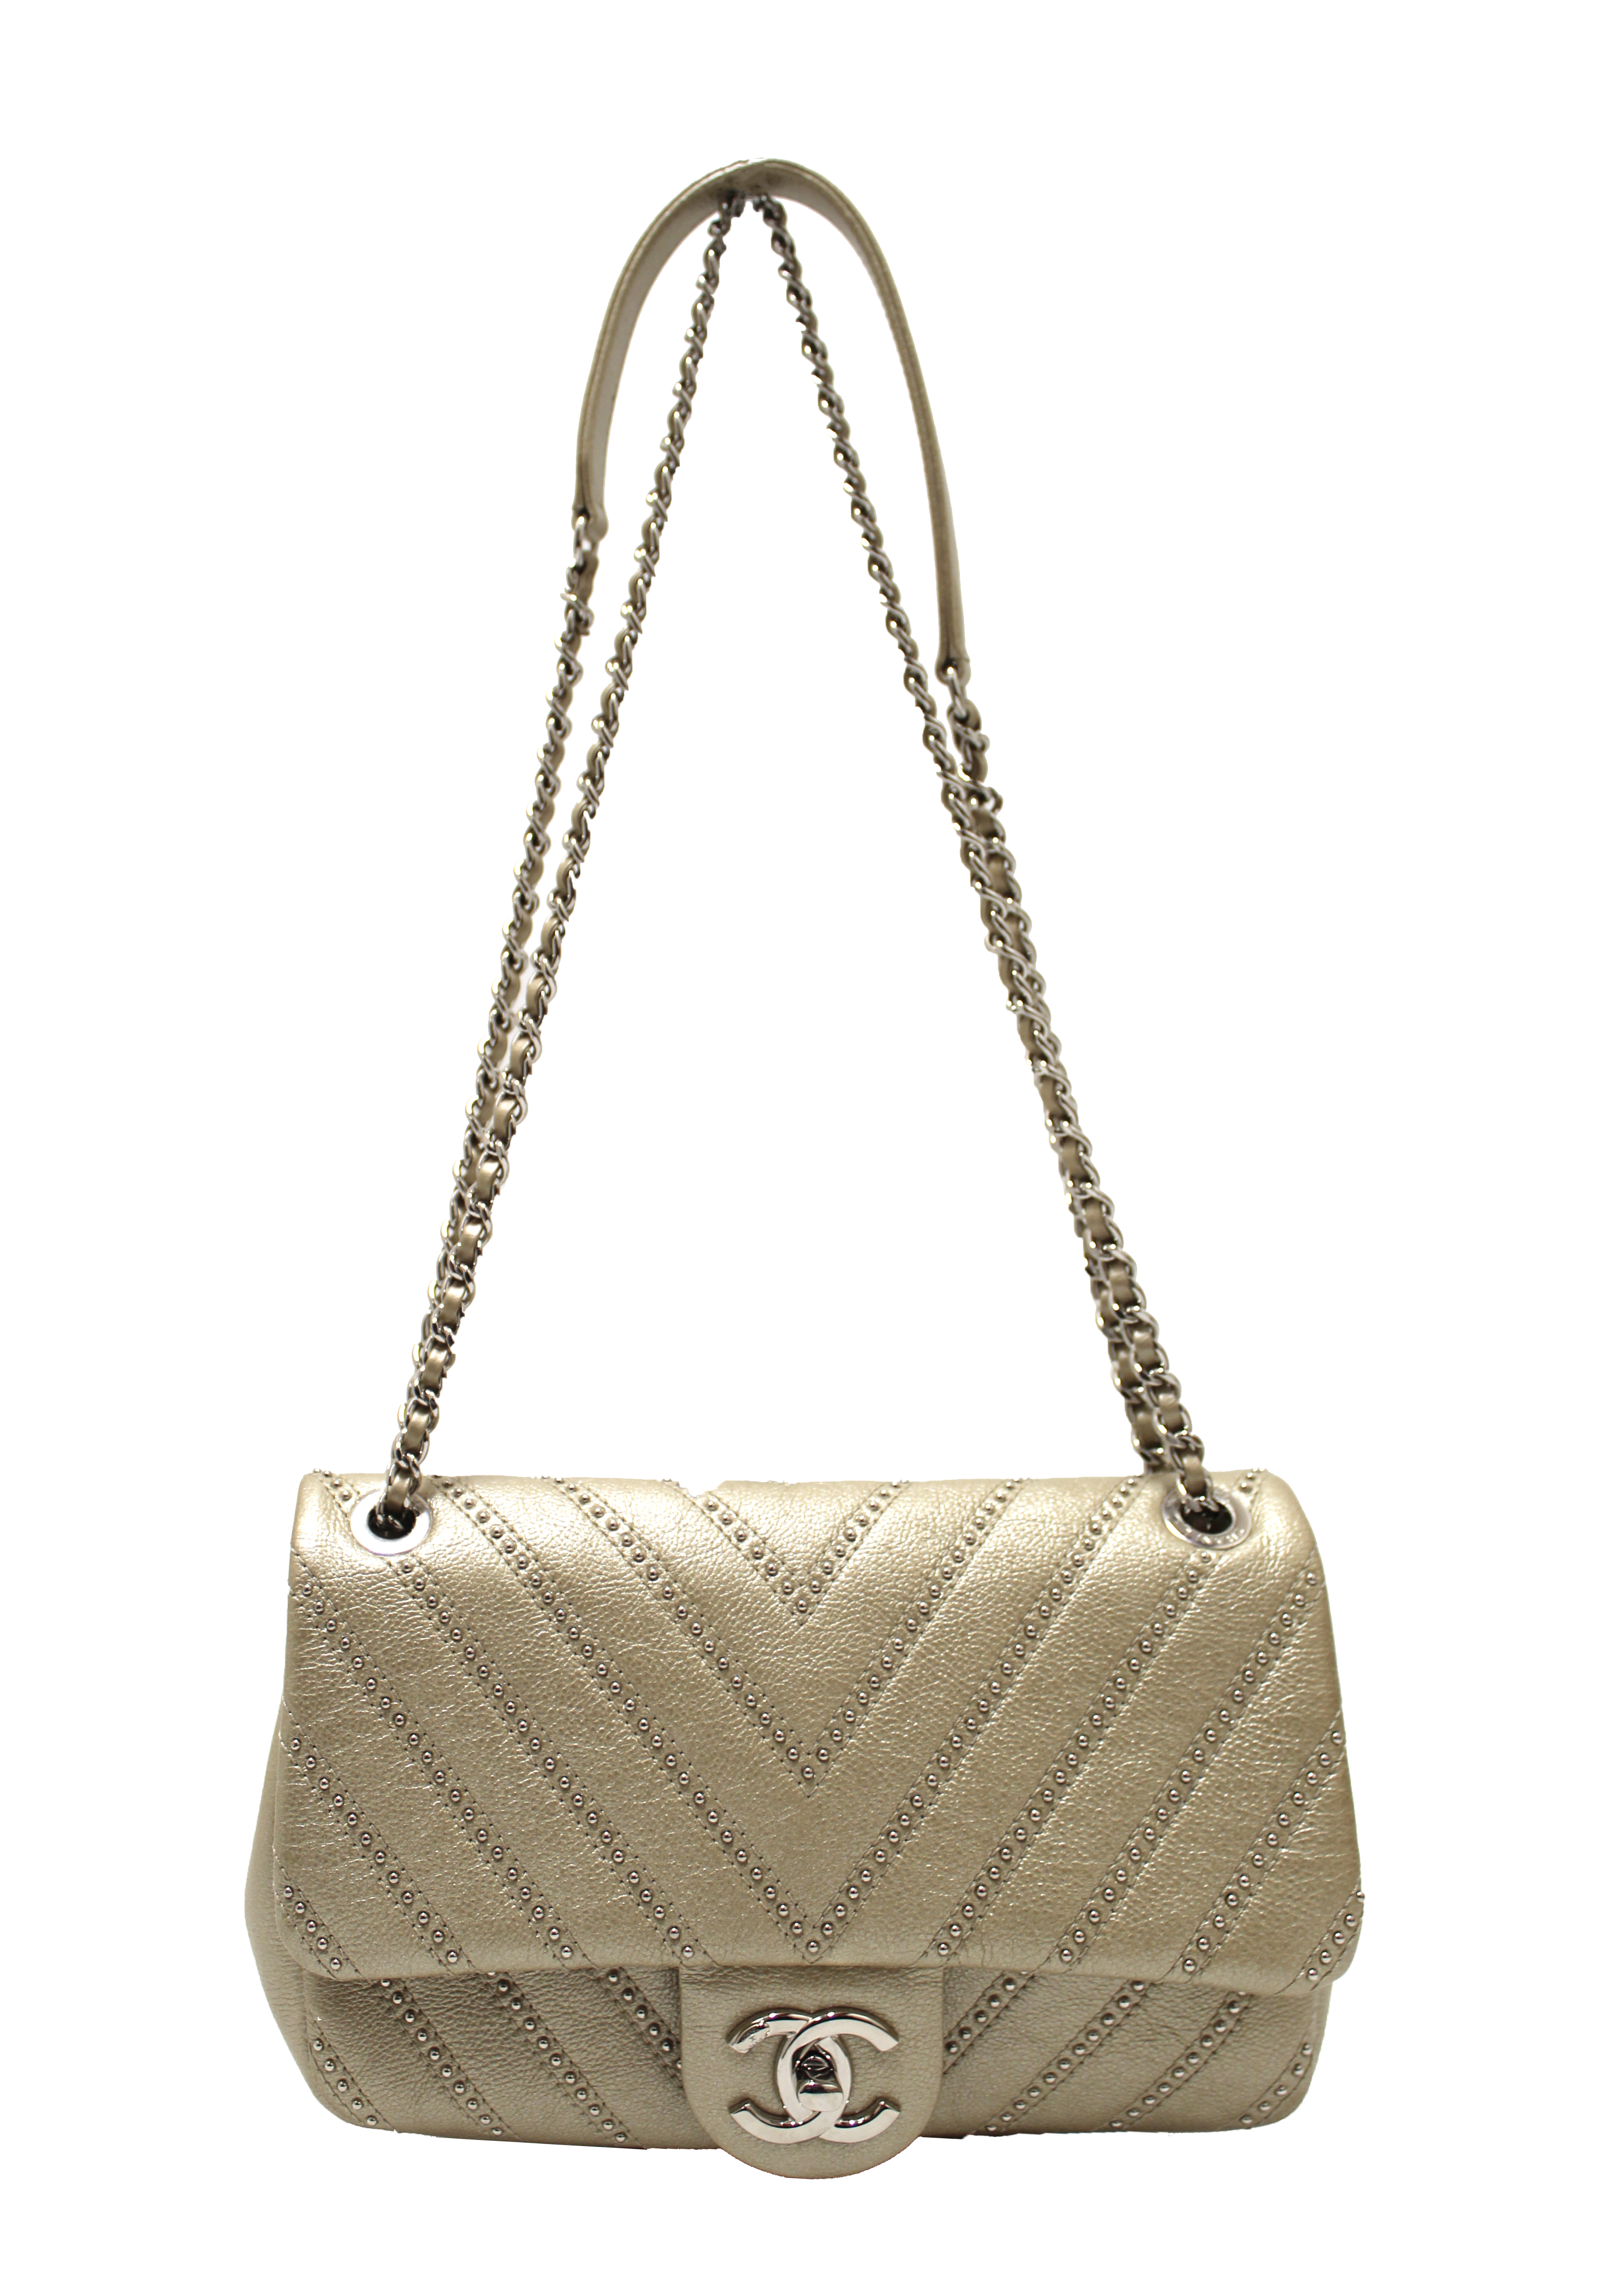 Authentic Chanel Gold Studs Calfskin Leather Mini Chevron Quilted Classic Shoulder Bag